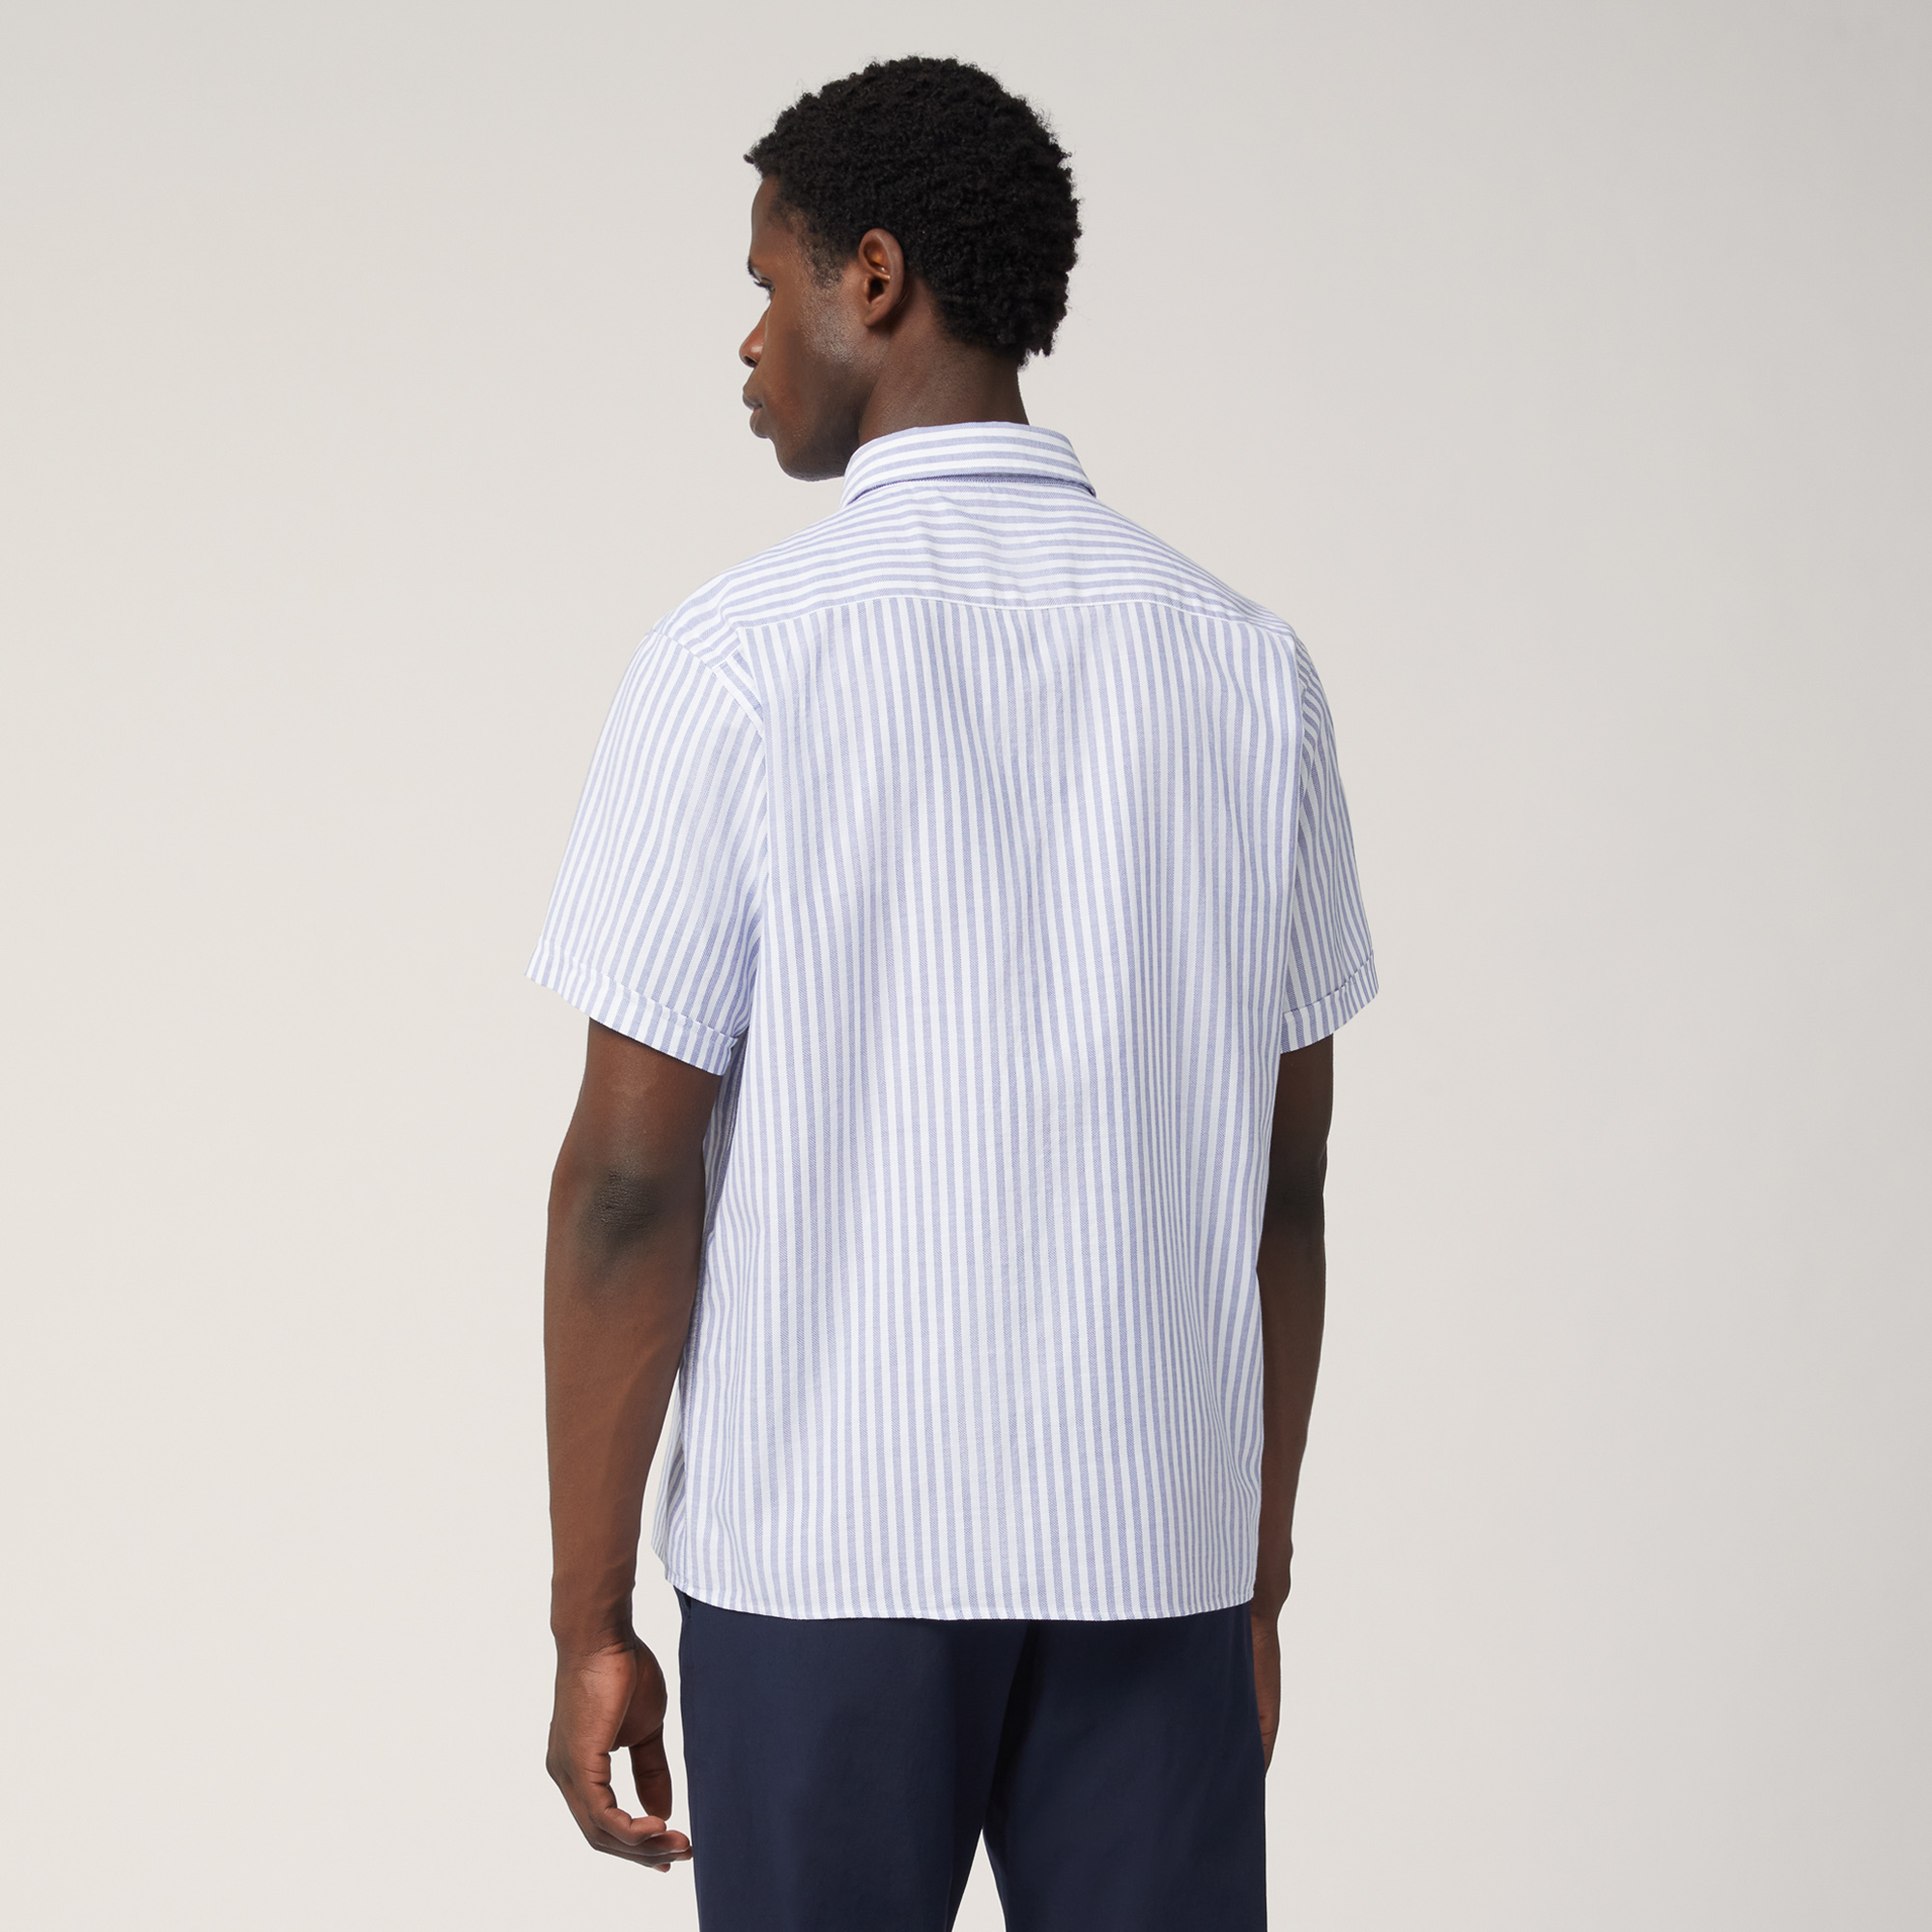 Striped Woven Cotton Short-Sleeved Shirt, Blue, large image number 1